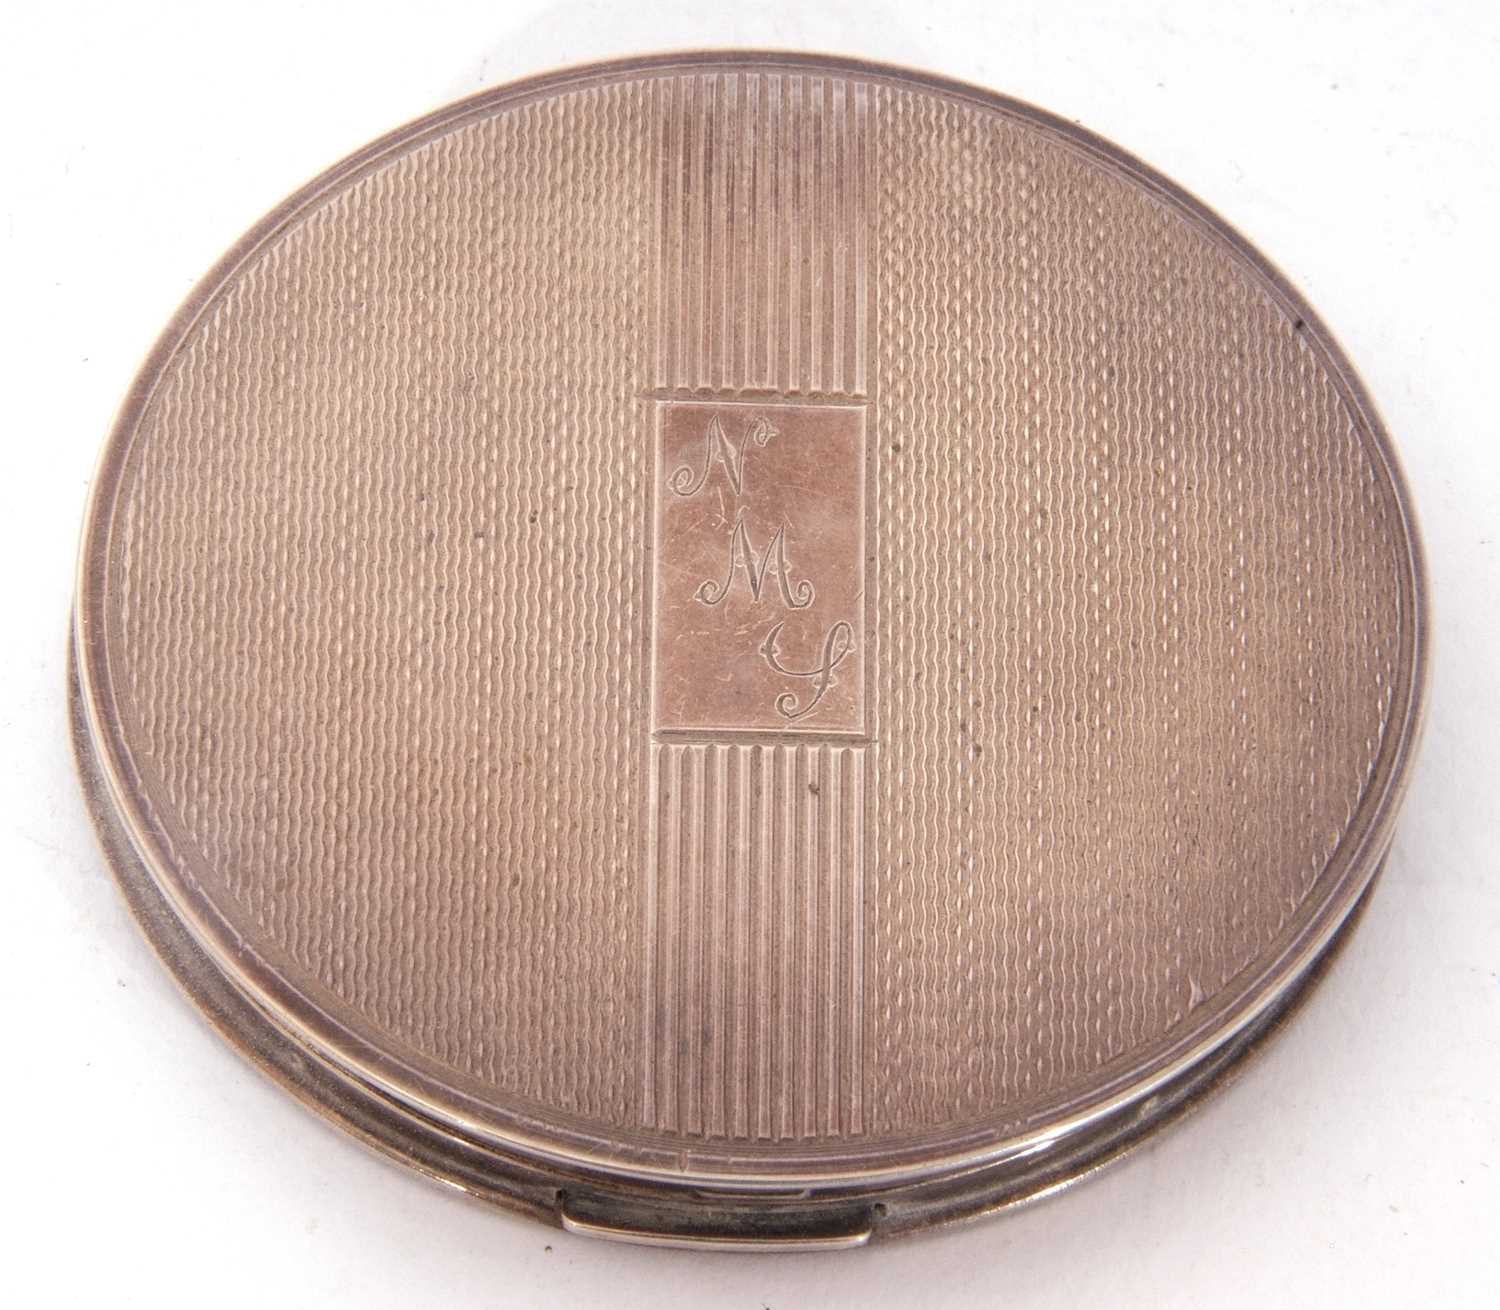 George VI circular compact with banded engine turned decoration having internal mirror and powder - Image 2 of 4